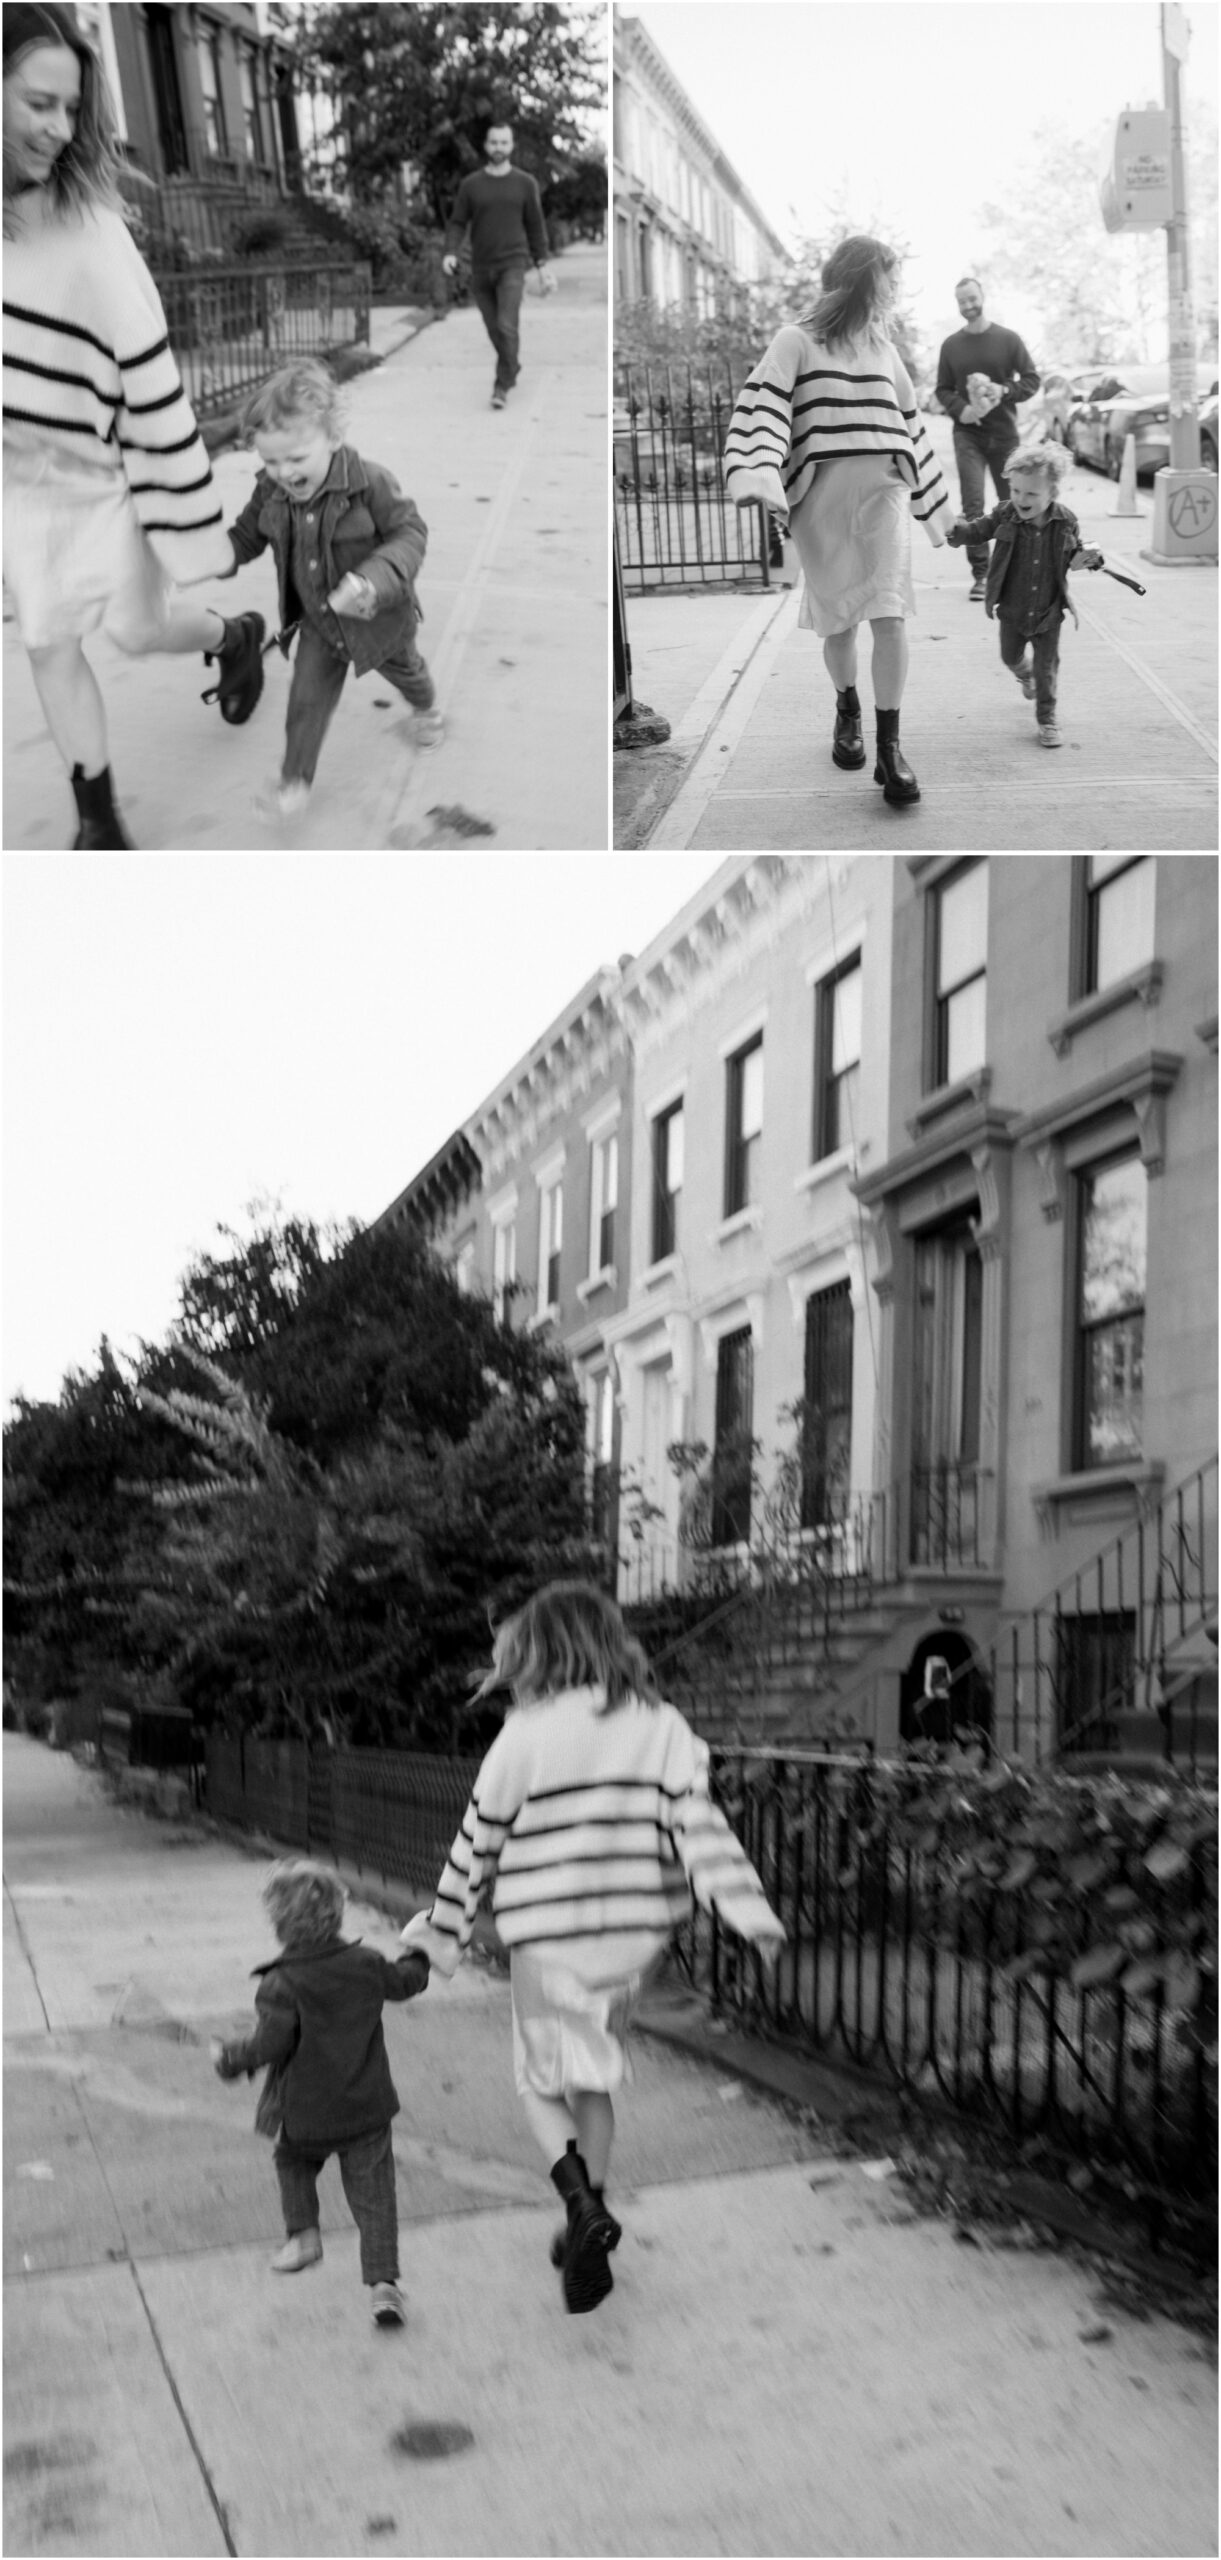 mom and child running together on the sidewalk in Brooklyn, New York in a black and white photo